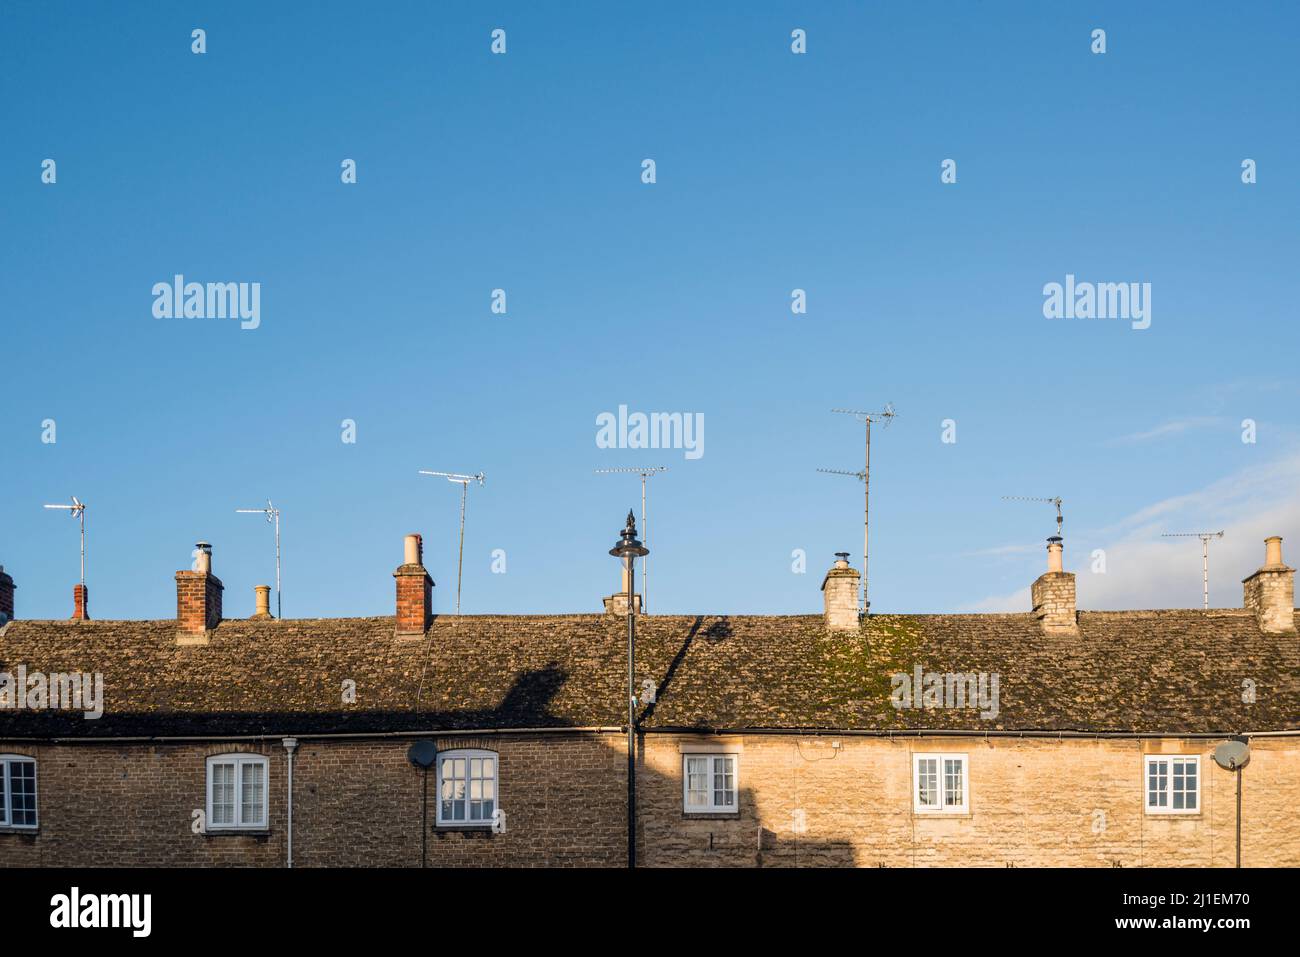 Cotswold stone cottages with TV aerial on roof, Cotswold town Tetbury, Gloucestershire, UK Stock Photo